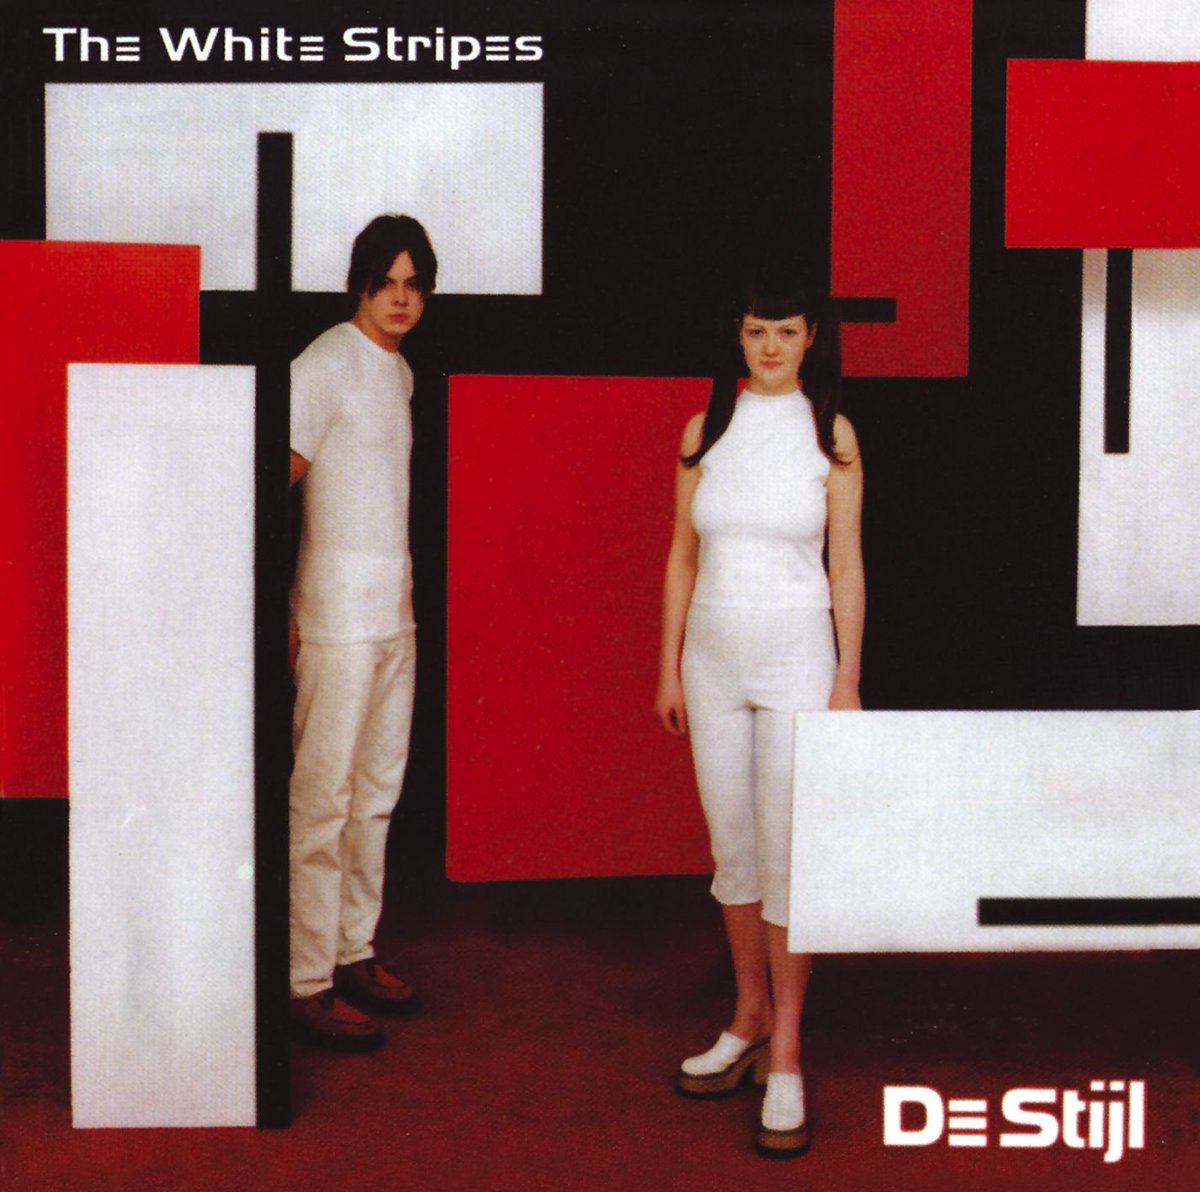 20 years ago today, #theWhiteStripes (@whitestripesnet) released “De Stijl.” The style! Read our review of #JackWhite’s essential latest LP (@thirdmanrecords): magnetmagazine.com/2018/05/08/ess…